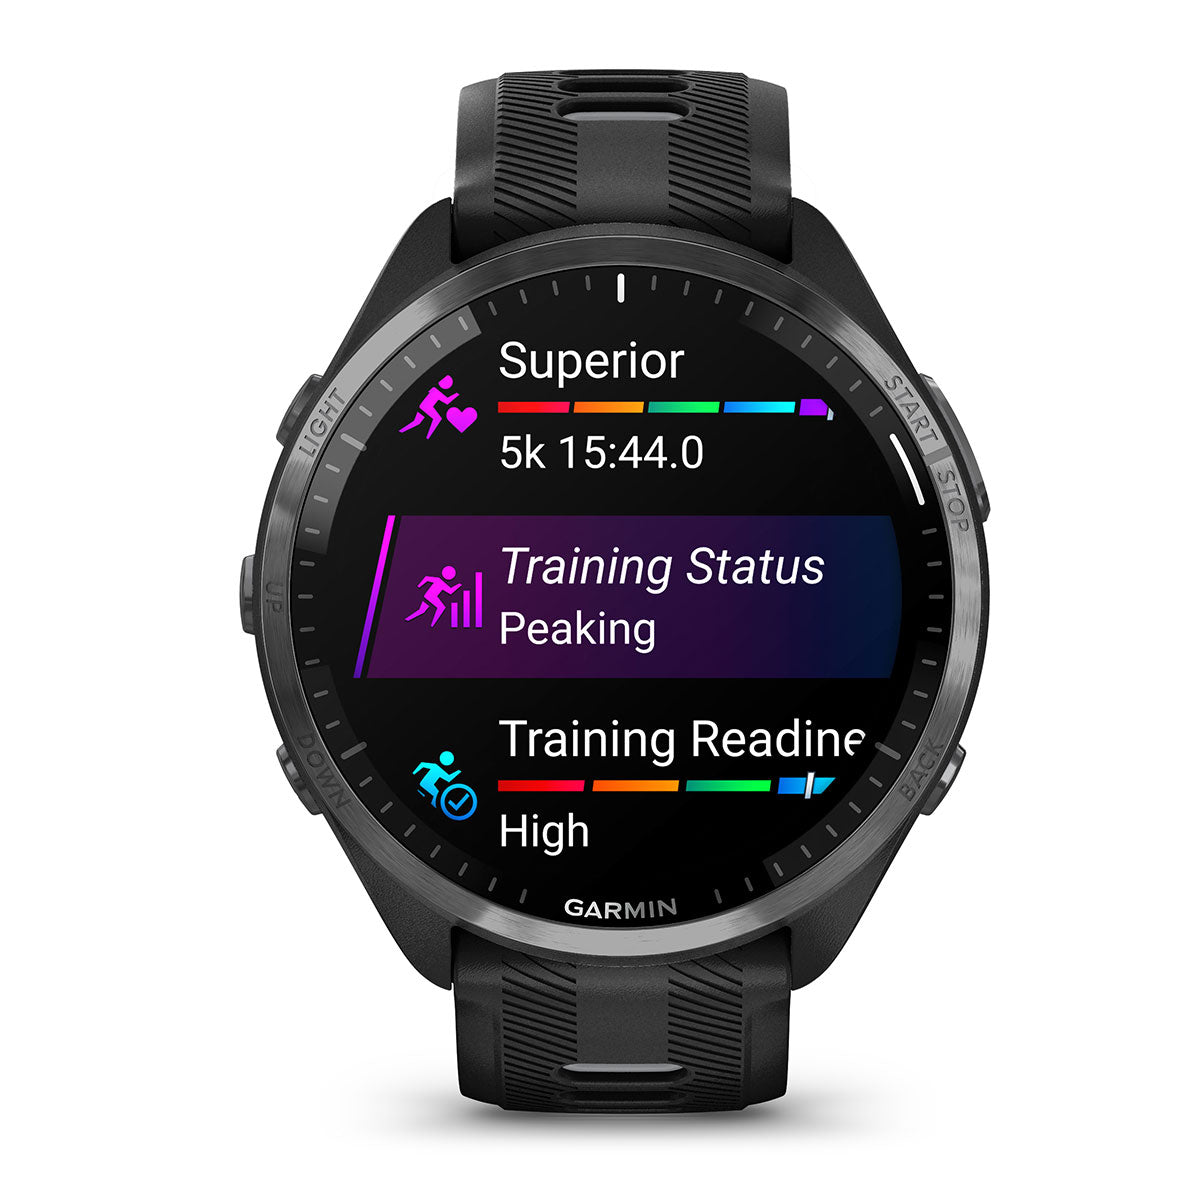 Garmin Forerunner 965 (Black/Powder Gray) Premium Running GPS Smartwatch | Gift Box with PlayBetter HD Screen Protectors, Wall Adapter & Case - image 4 of 7